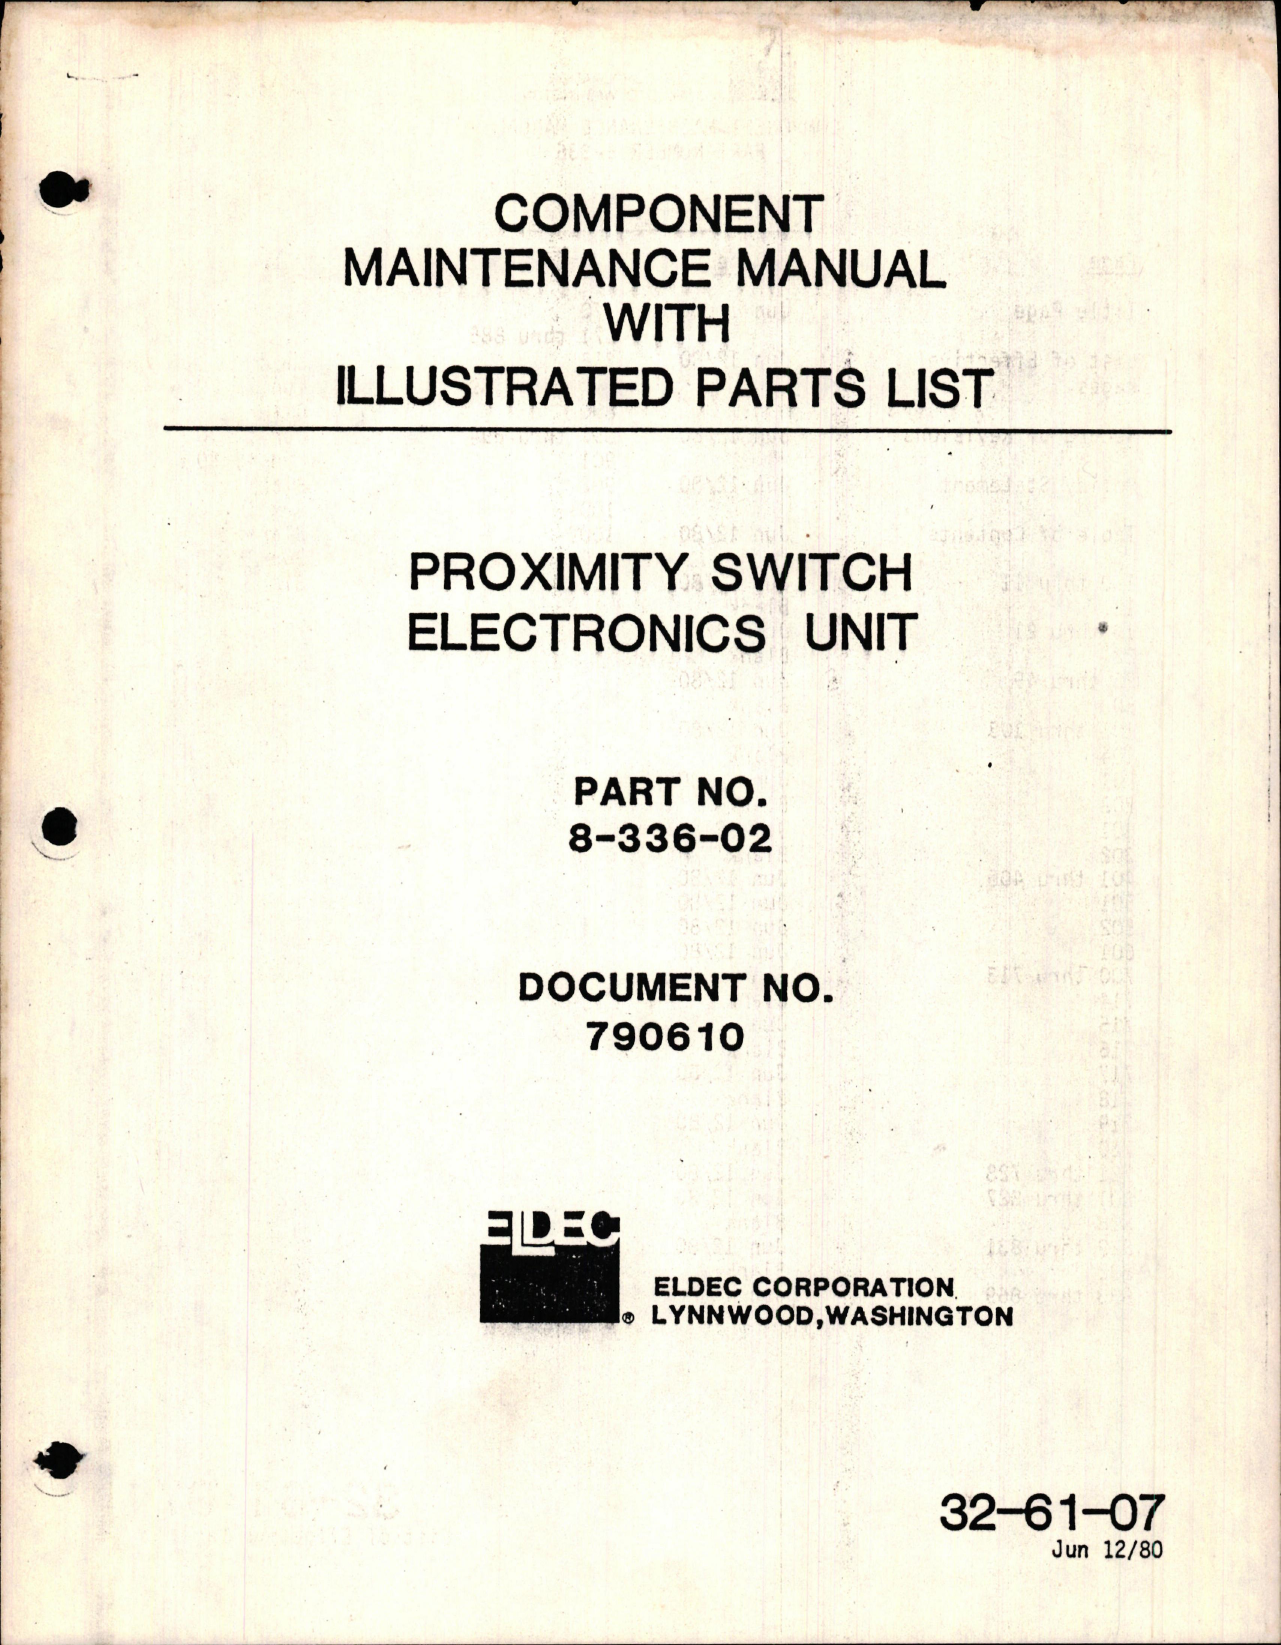 Sample page 1 from AirCorps Library document: Maintenance Manual with Illustrated Parts List for Proximity Switch Electronics Unit - Part 8-336-02